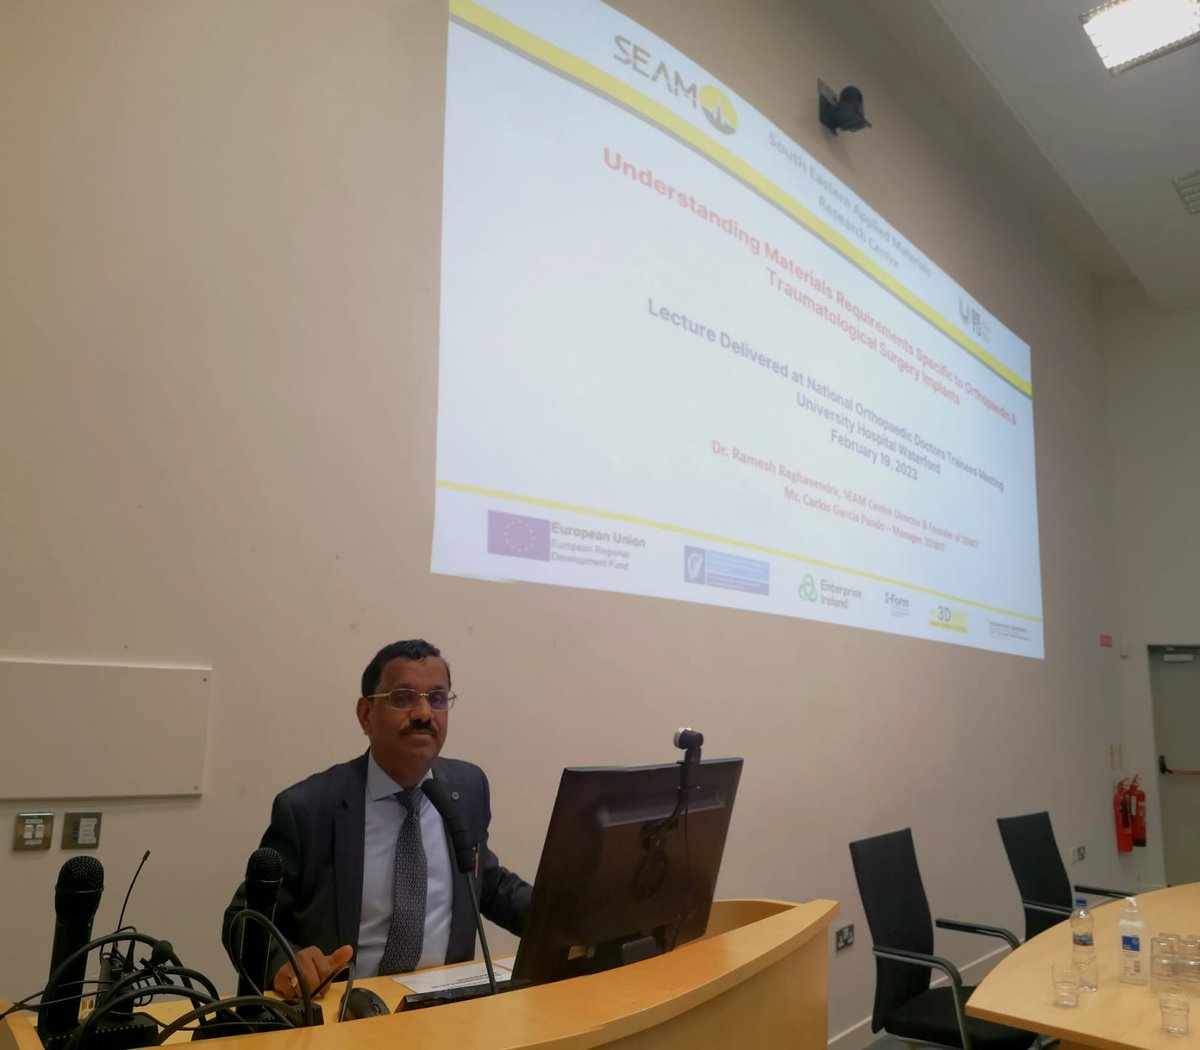 ..@SEAM_setu Director Ramesh.Raghavendra giving a lecture on understanding materials requirements for surgical implants at National Orthopaedic Doctors Trainees Meeting at University Hospital Waterford today @EngTechWIT @SETU_Research @I_Form_Centre